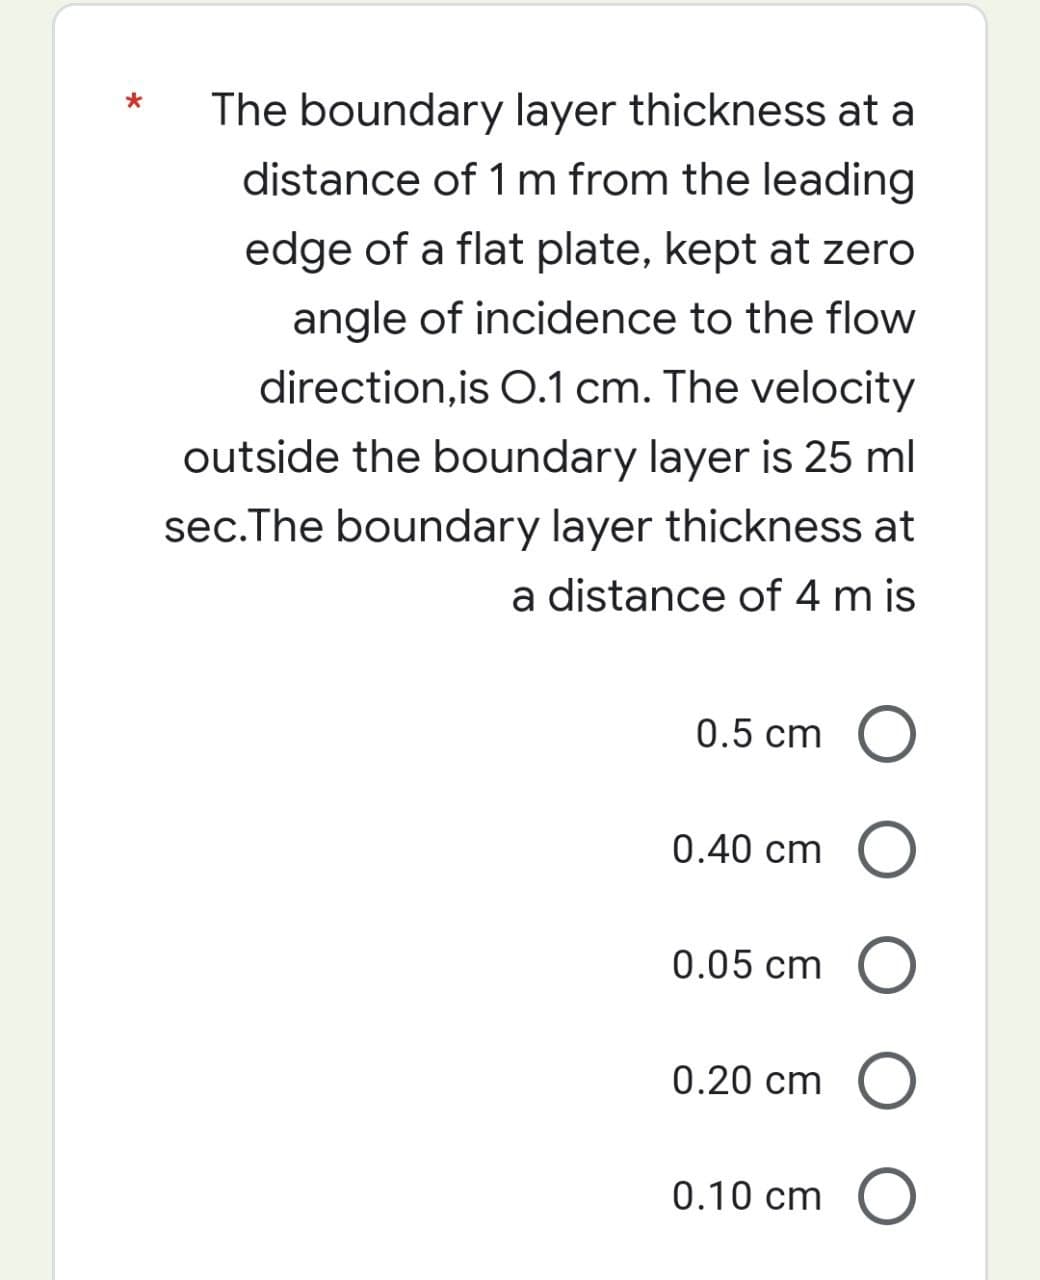 The boundary layer thickness at a
distance of 1 m from the leading
edge of a flat plate, kept at zero
angle of incidence to the flow
direction,is O.1 cm. The velocity
outside the boundary layer is 25 ml
sec.The boundary layer thickness at
a distance of 4 m is
0.5 cm
0.40 cm
0.05 cm
0.20 cm
0.10 cm
O
O